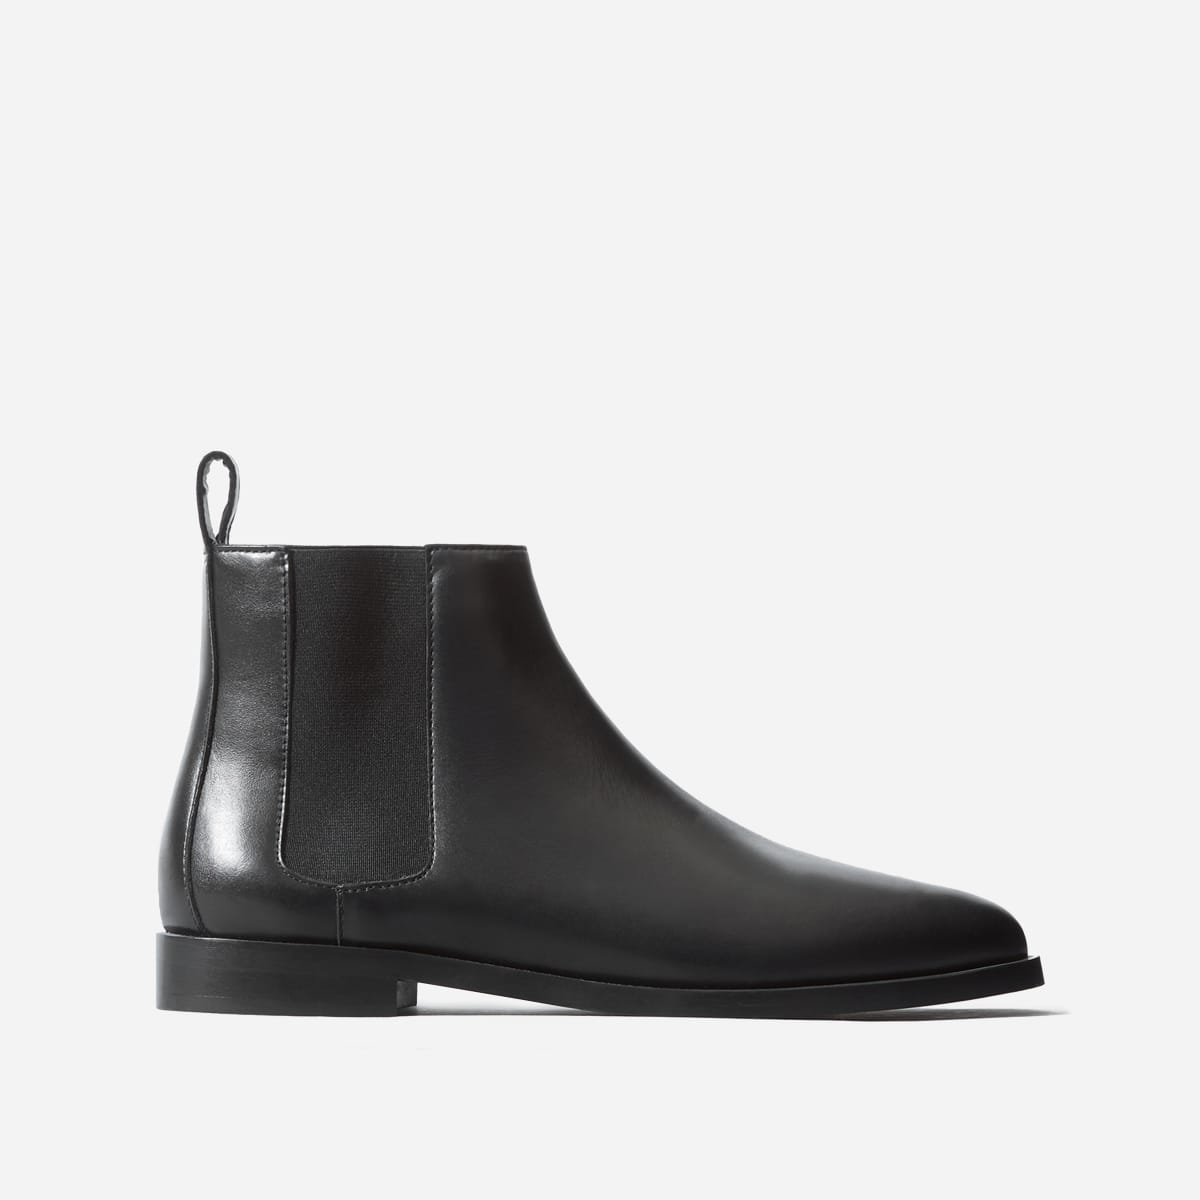 everlane square toe chelsea boot review